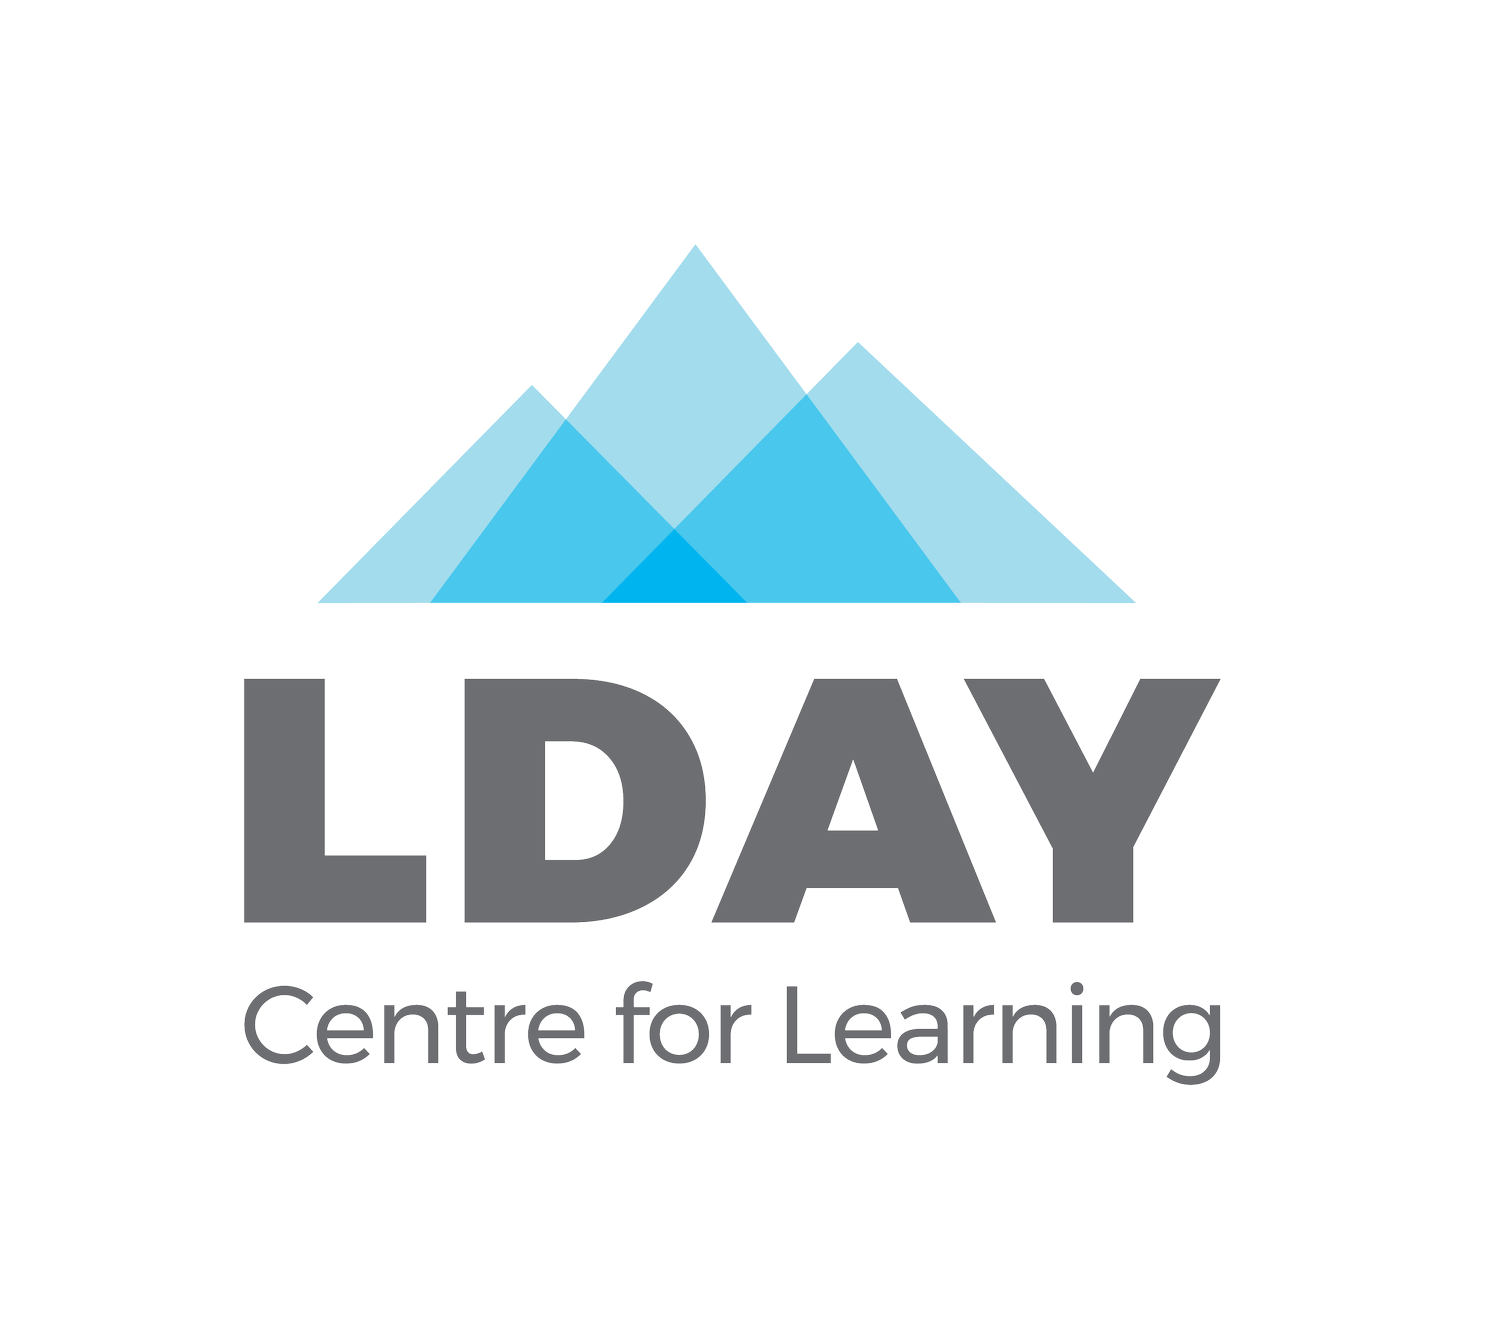 LDAY Centre for Learning